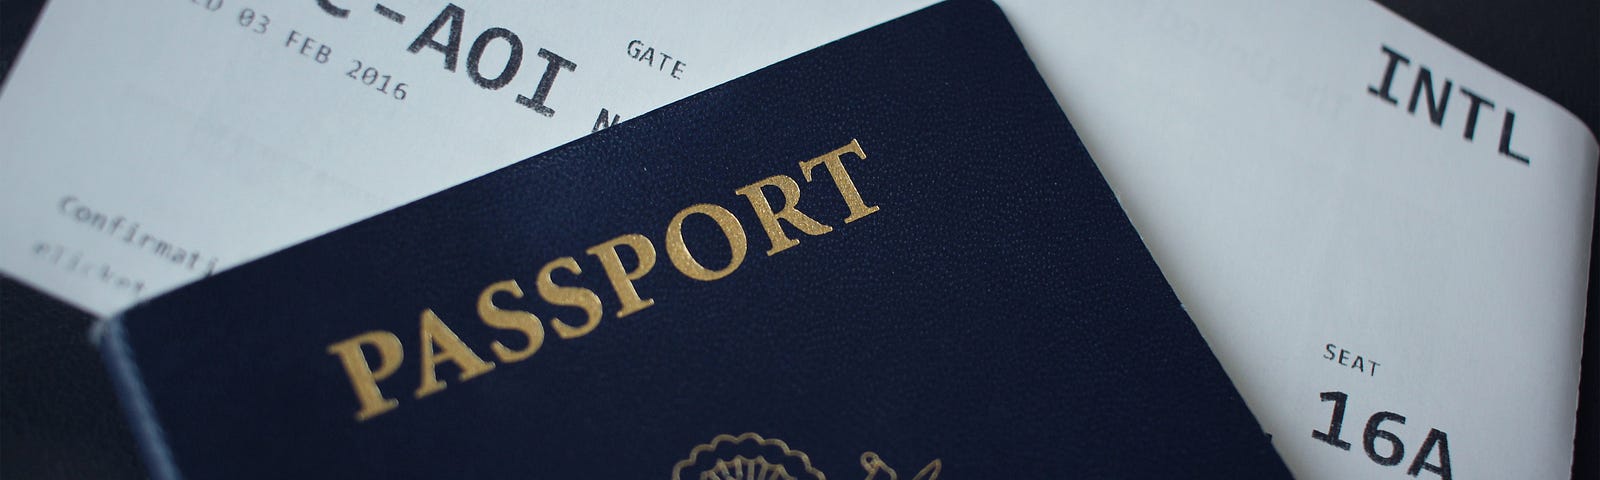 Photo of the cover of a passport and a plane ticket